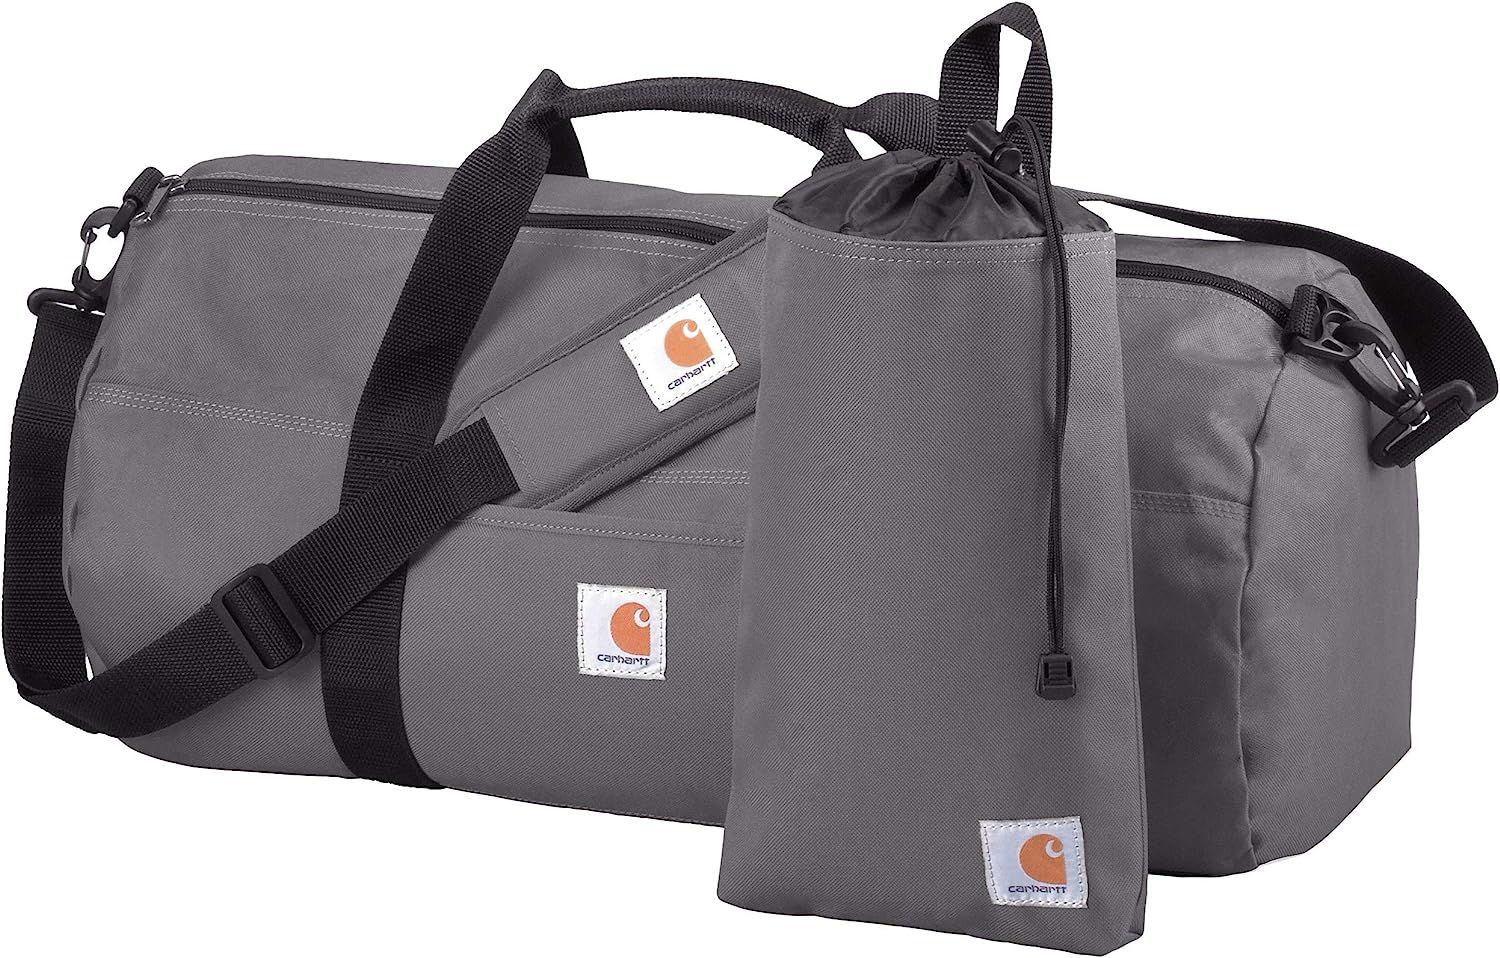 Carhartt Trade Series 2-in-1 Packable Duffel with Utility Pouch, Grey, Medium (21.5-Inch) | Amazon (US)